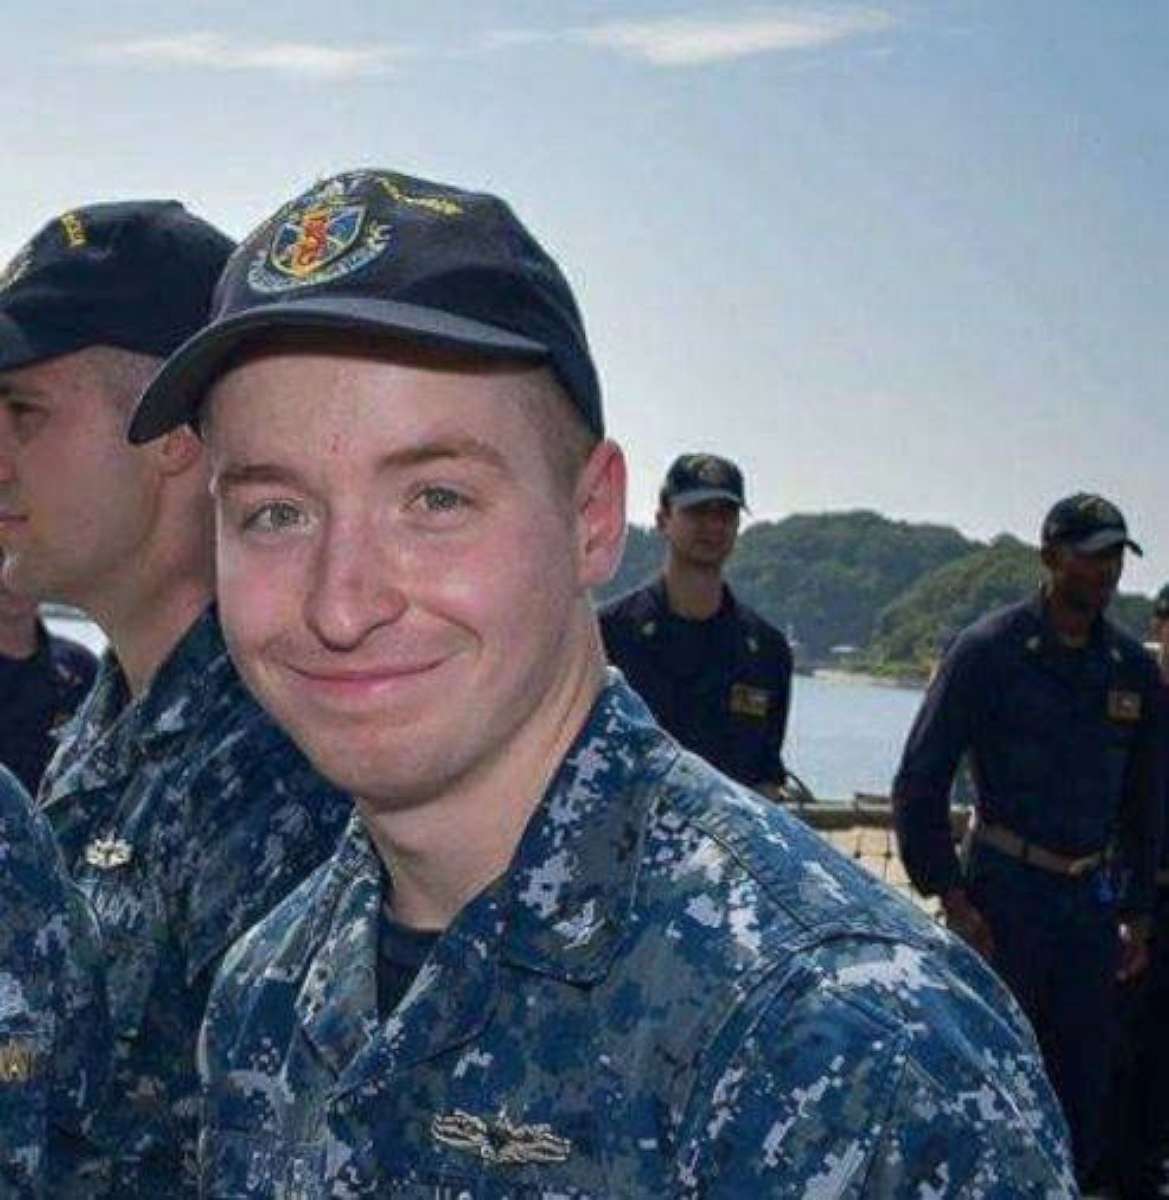 PHOTO: Ohio resident Drake Jacob was identified as one of the ten sailors missing after the USS John S. McCain collided with a merchant ship off the east coast of Singapore, Aug. 21, 2017.